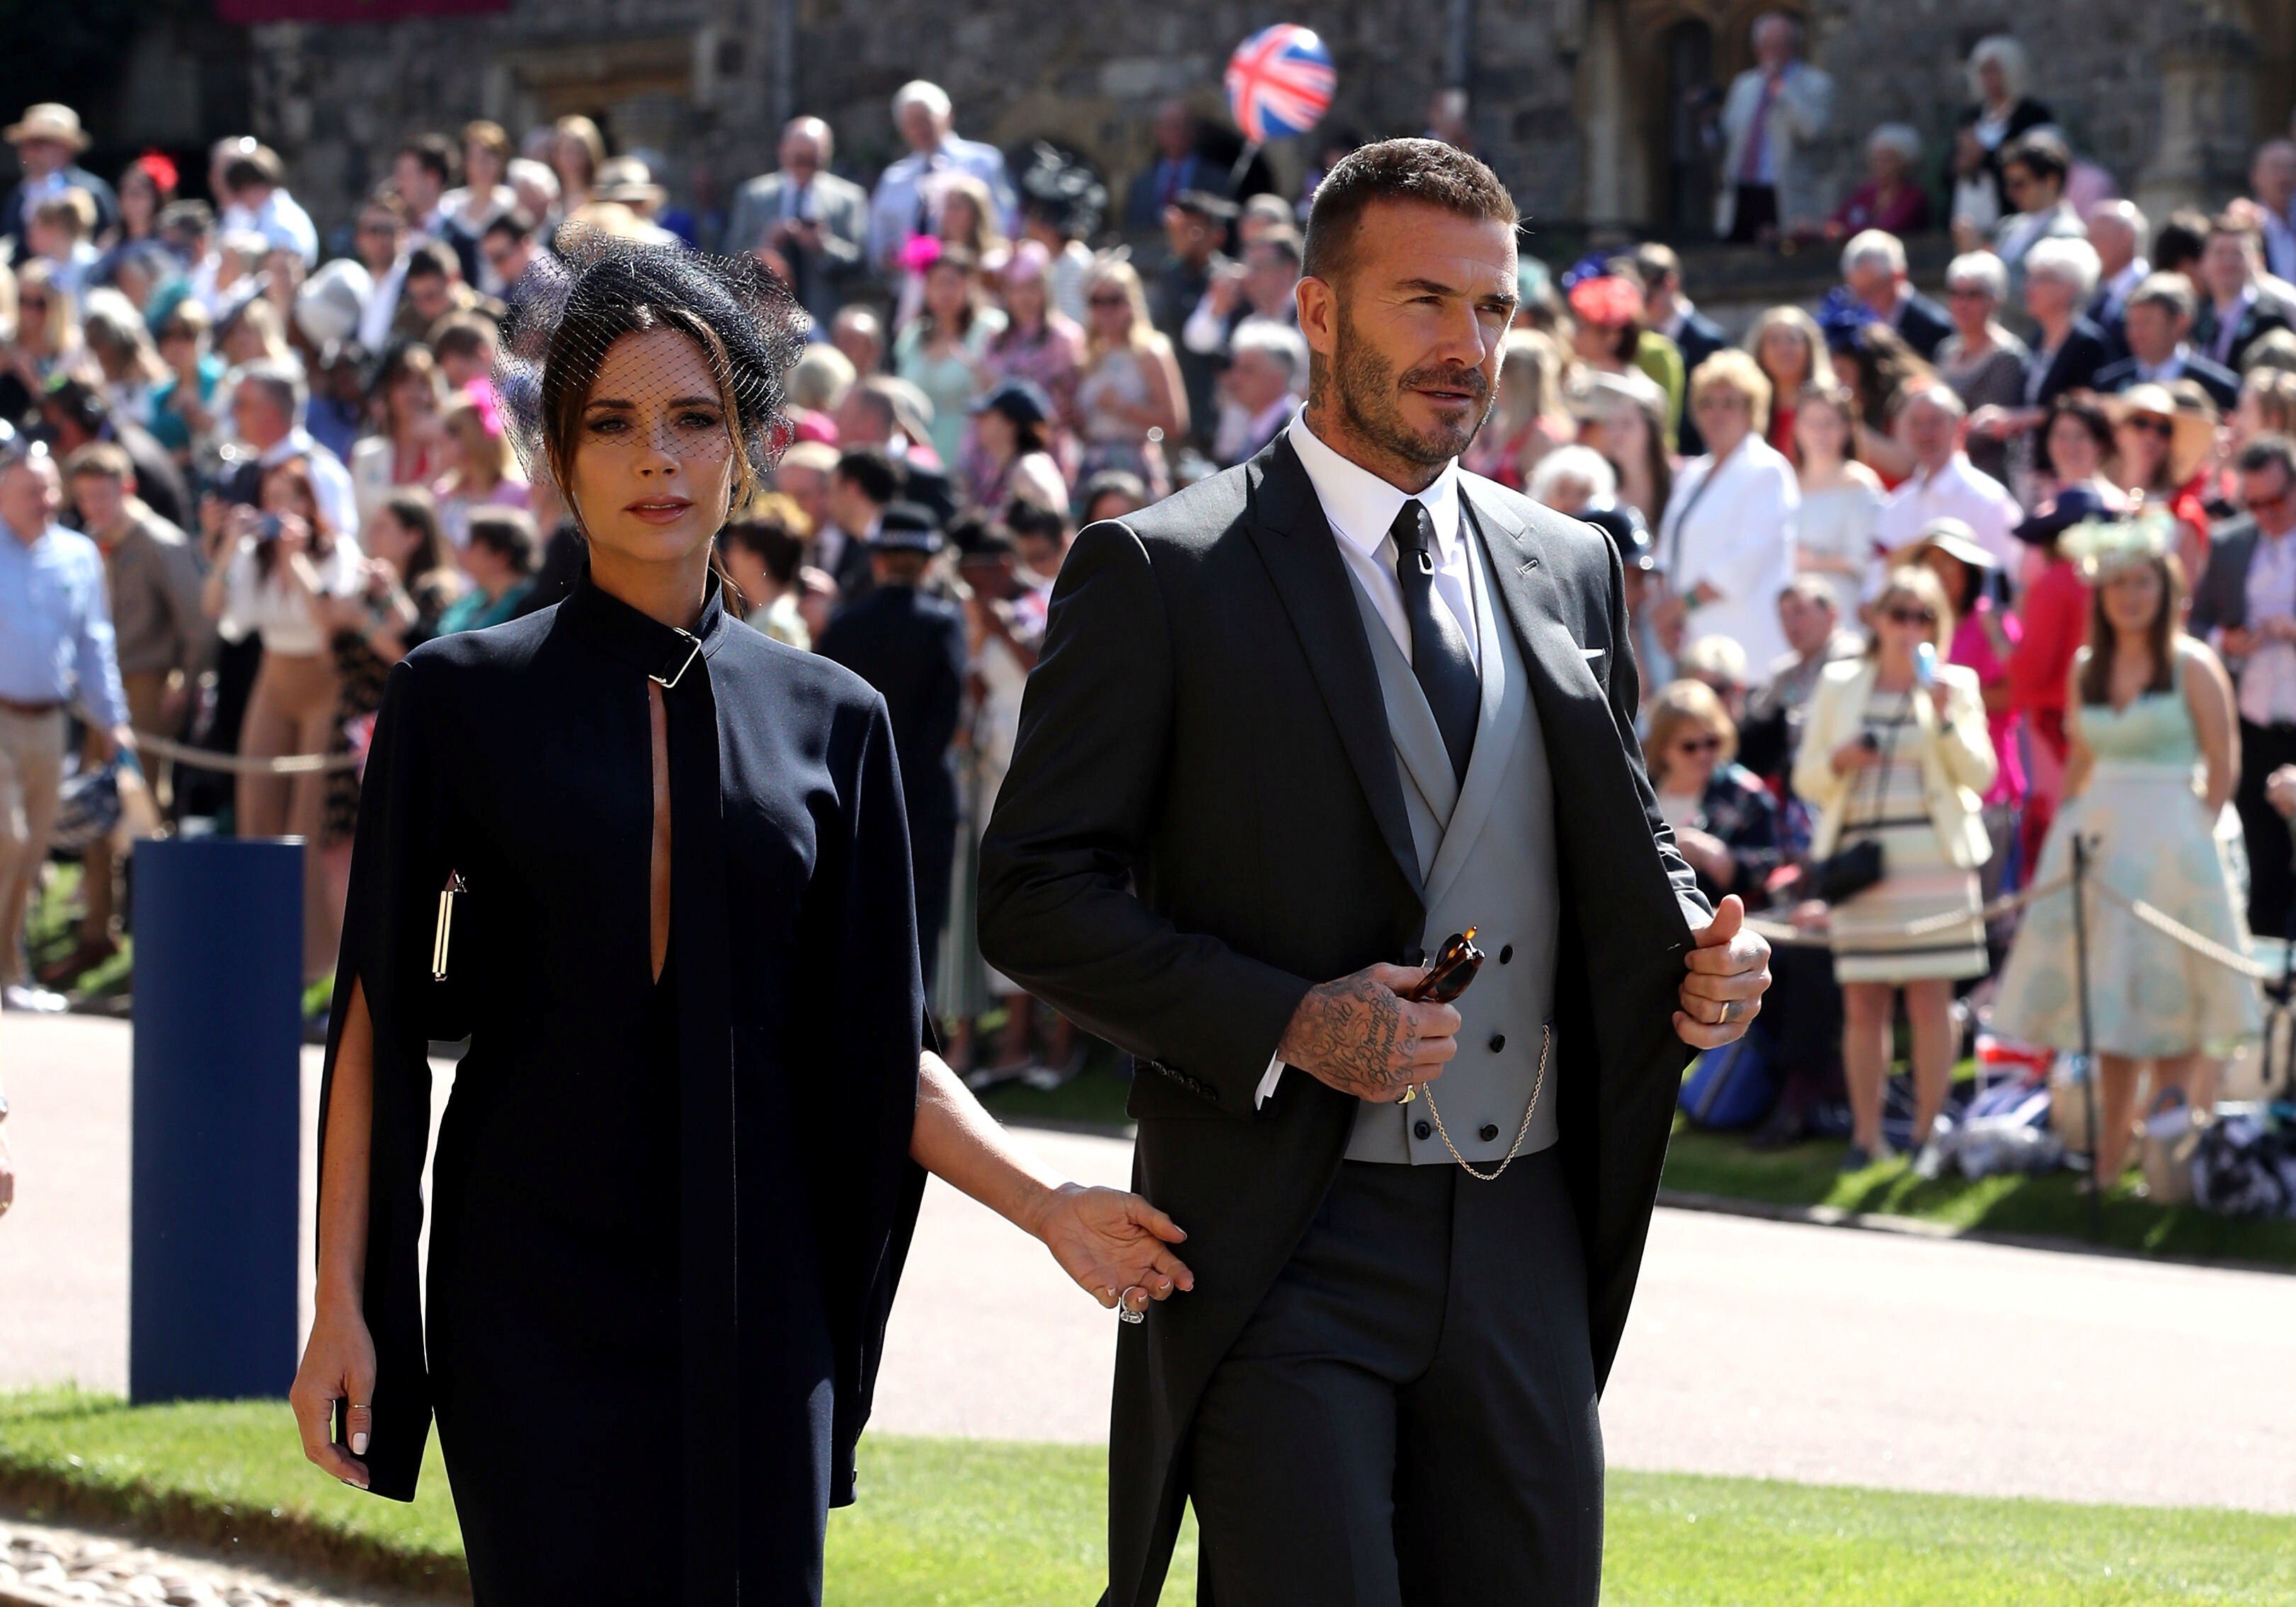 David Beckham added his gold pocket watch to his suit for the royal wedding of Meghan Markle and Prince Harry in 2018. Photo: Reuters